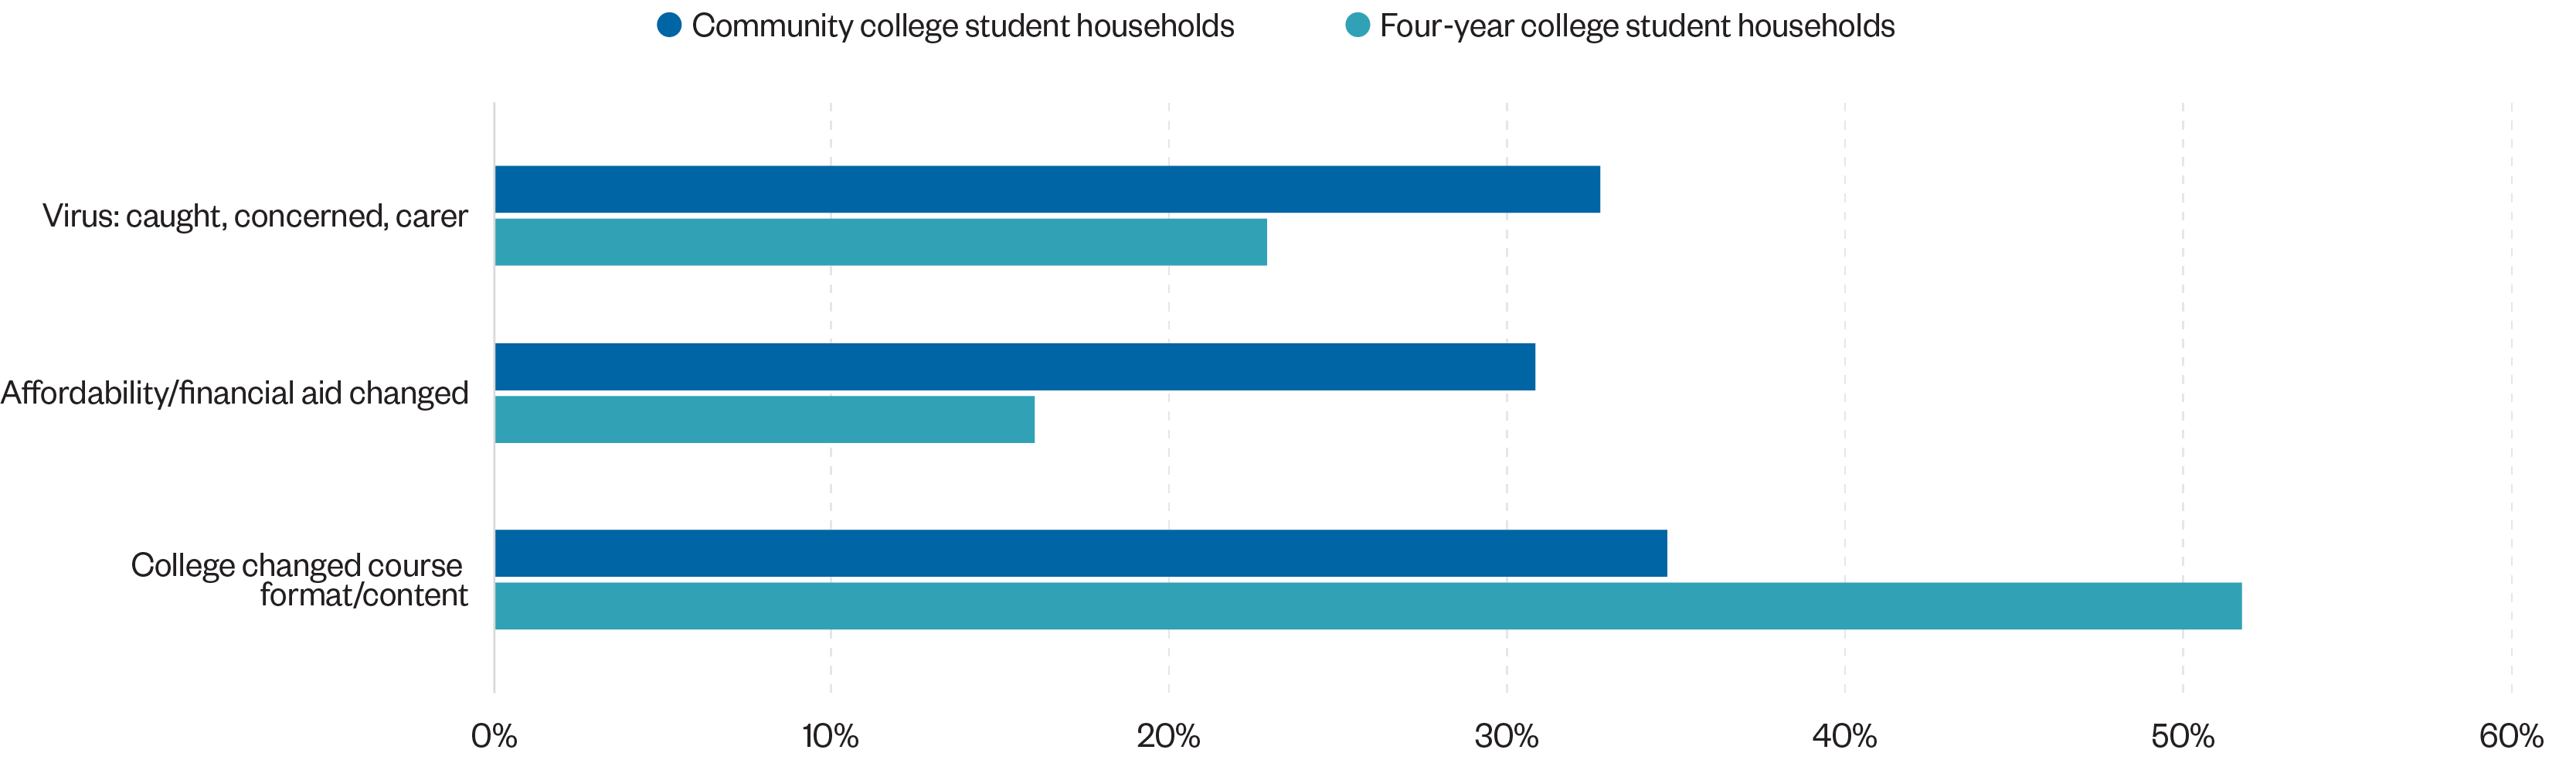 Results on why postsecondary enrollment plans changed